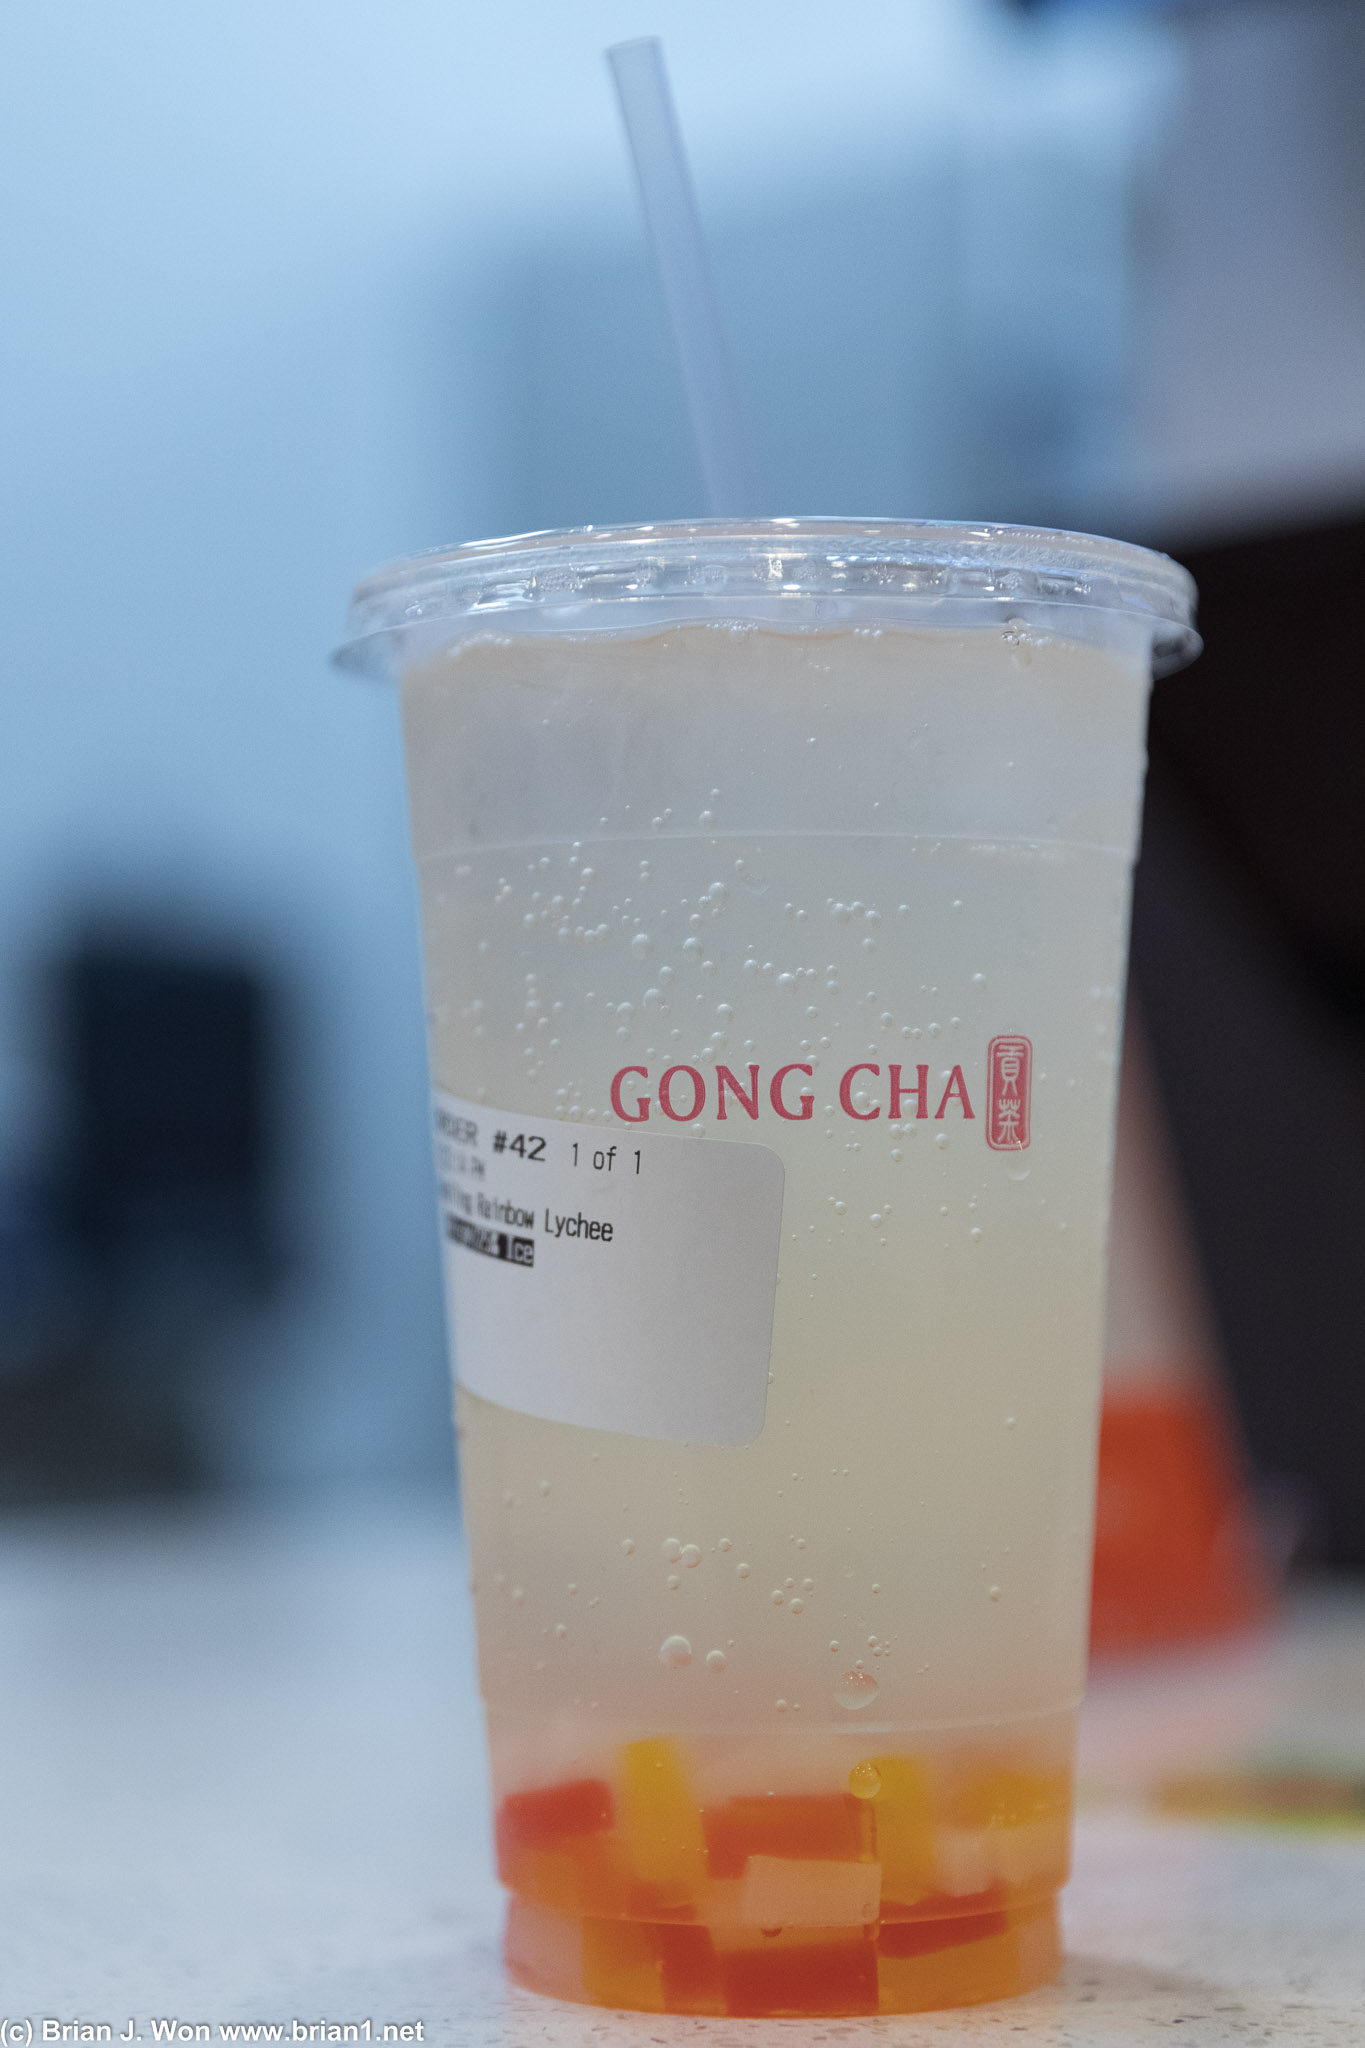 Lychee sparkle drink from Gong Cha.